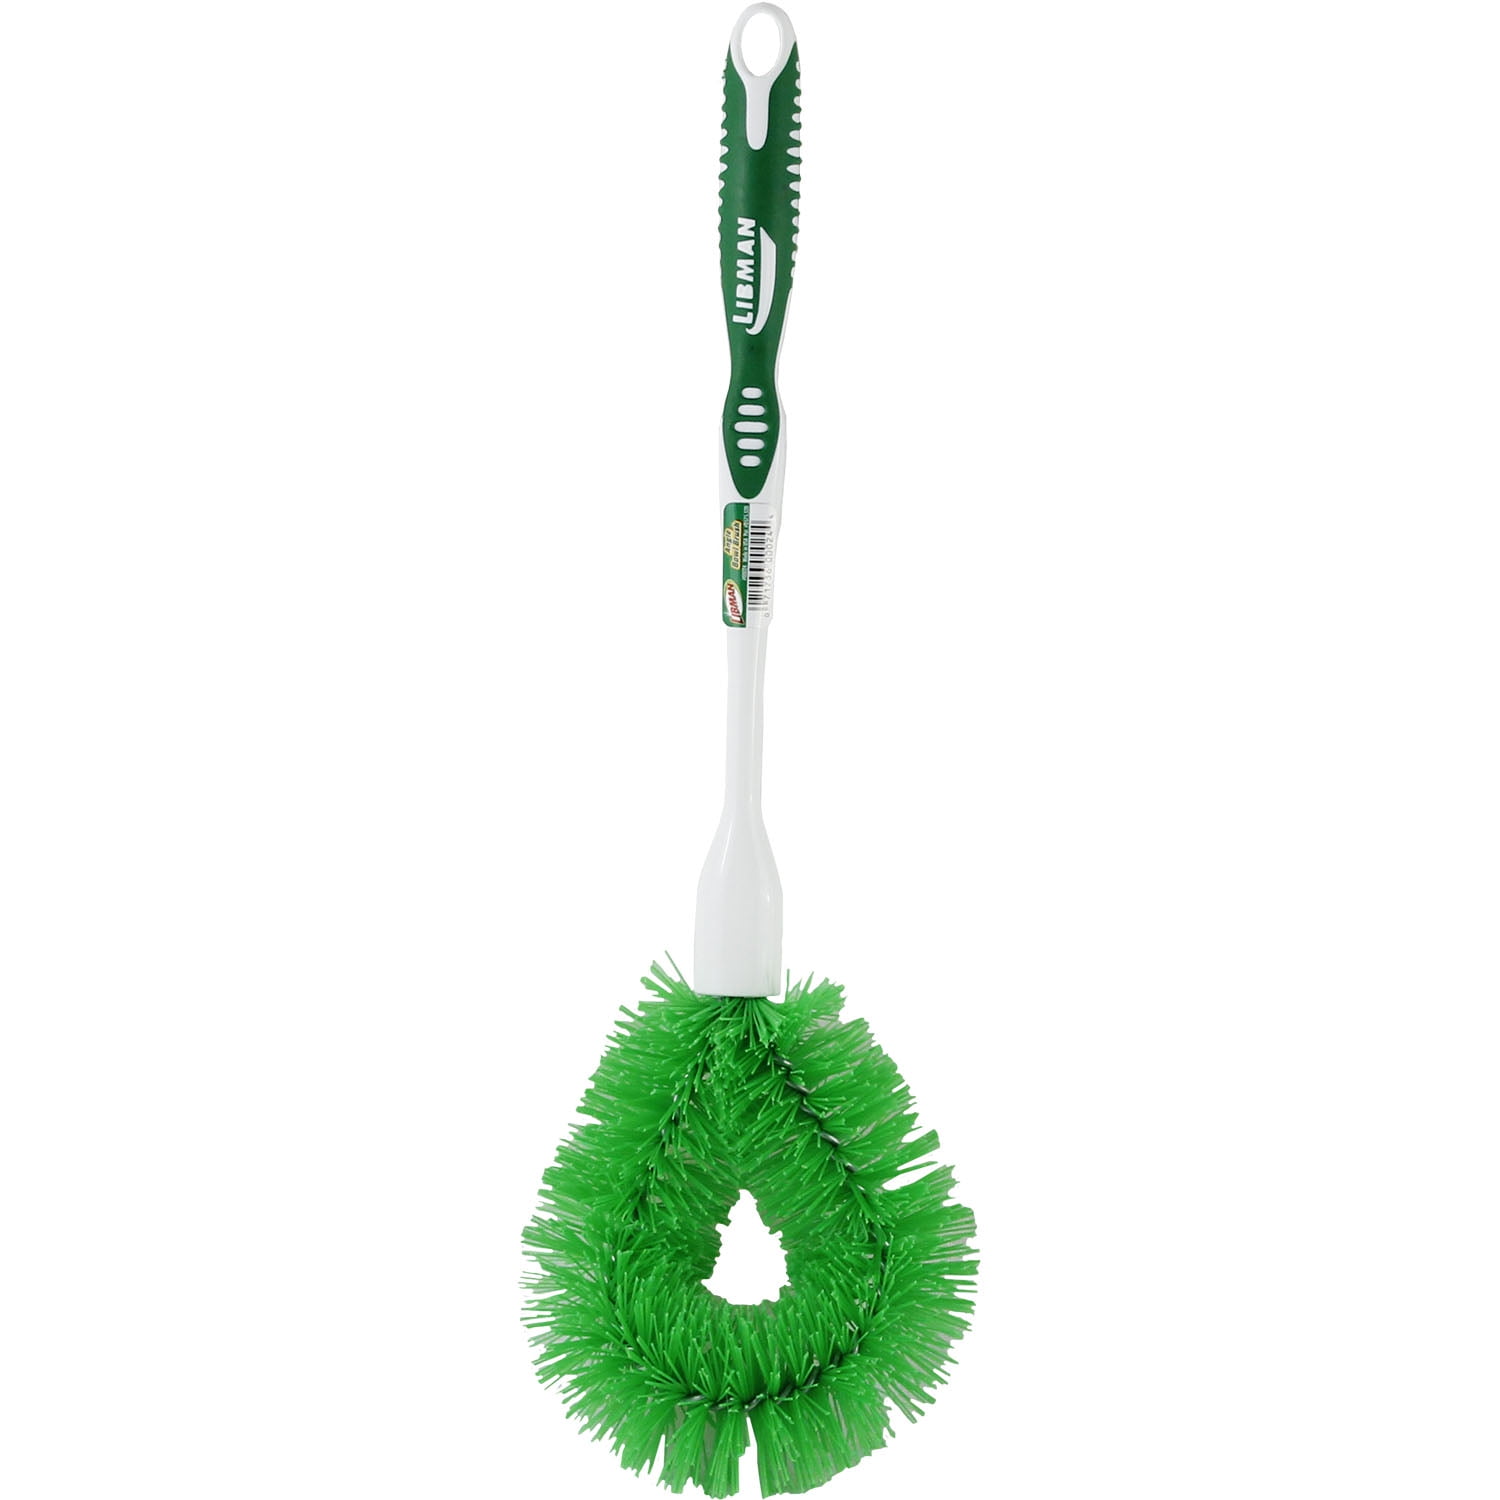 Libman Plastic Brush and Caddy Toilet Bowl 1 CT